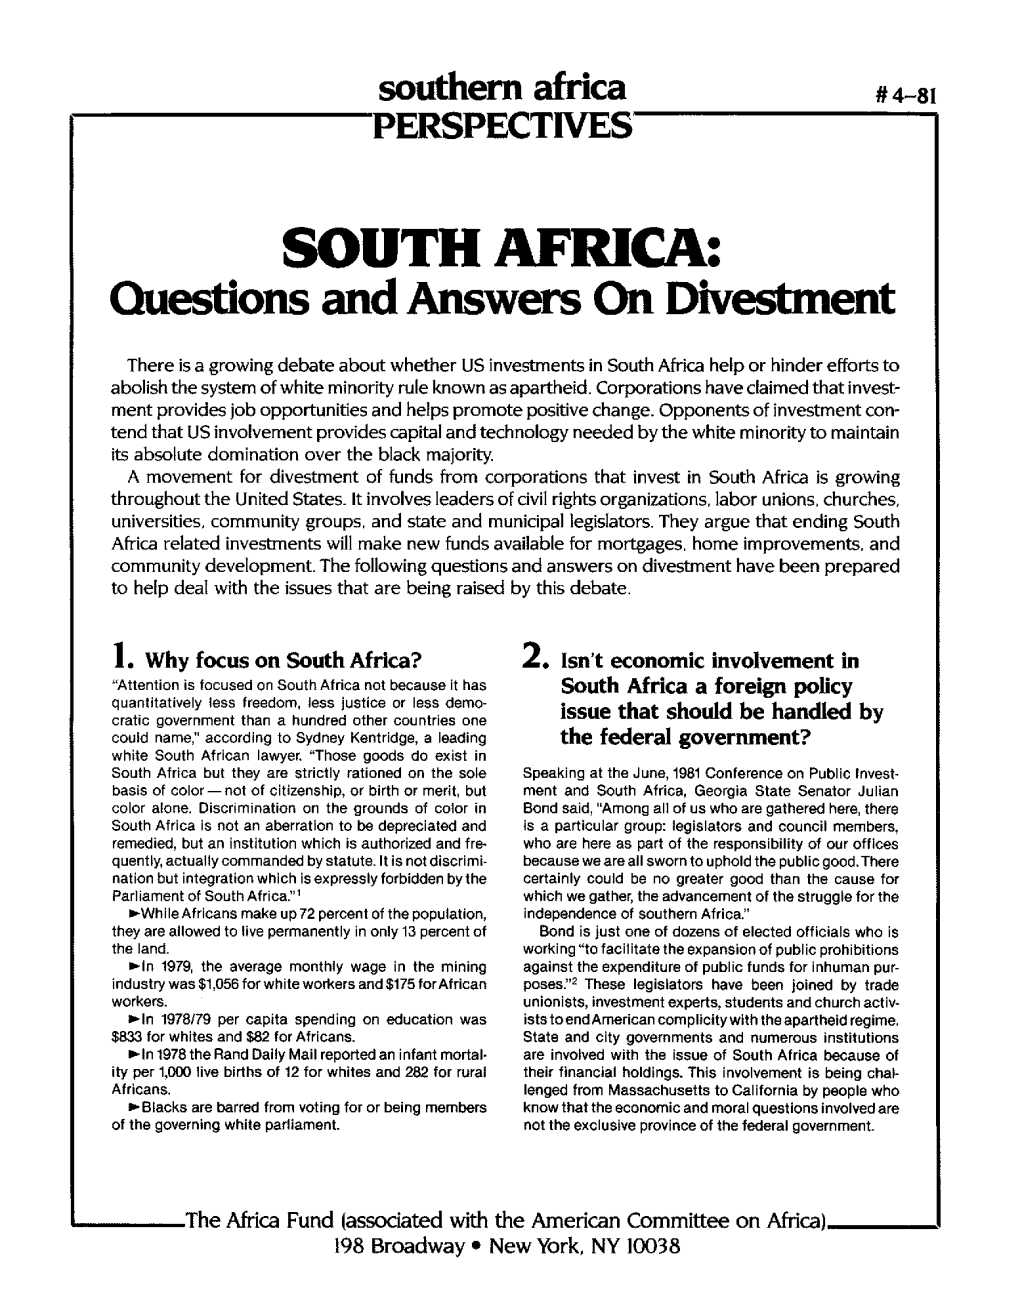 SOUTH AFRICA: Questions and Answers on Divestment